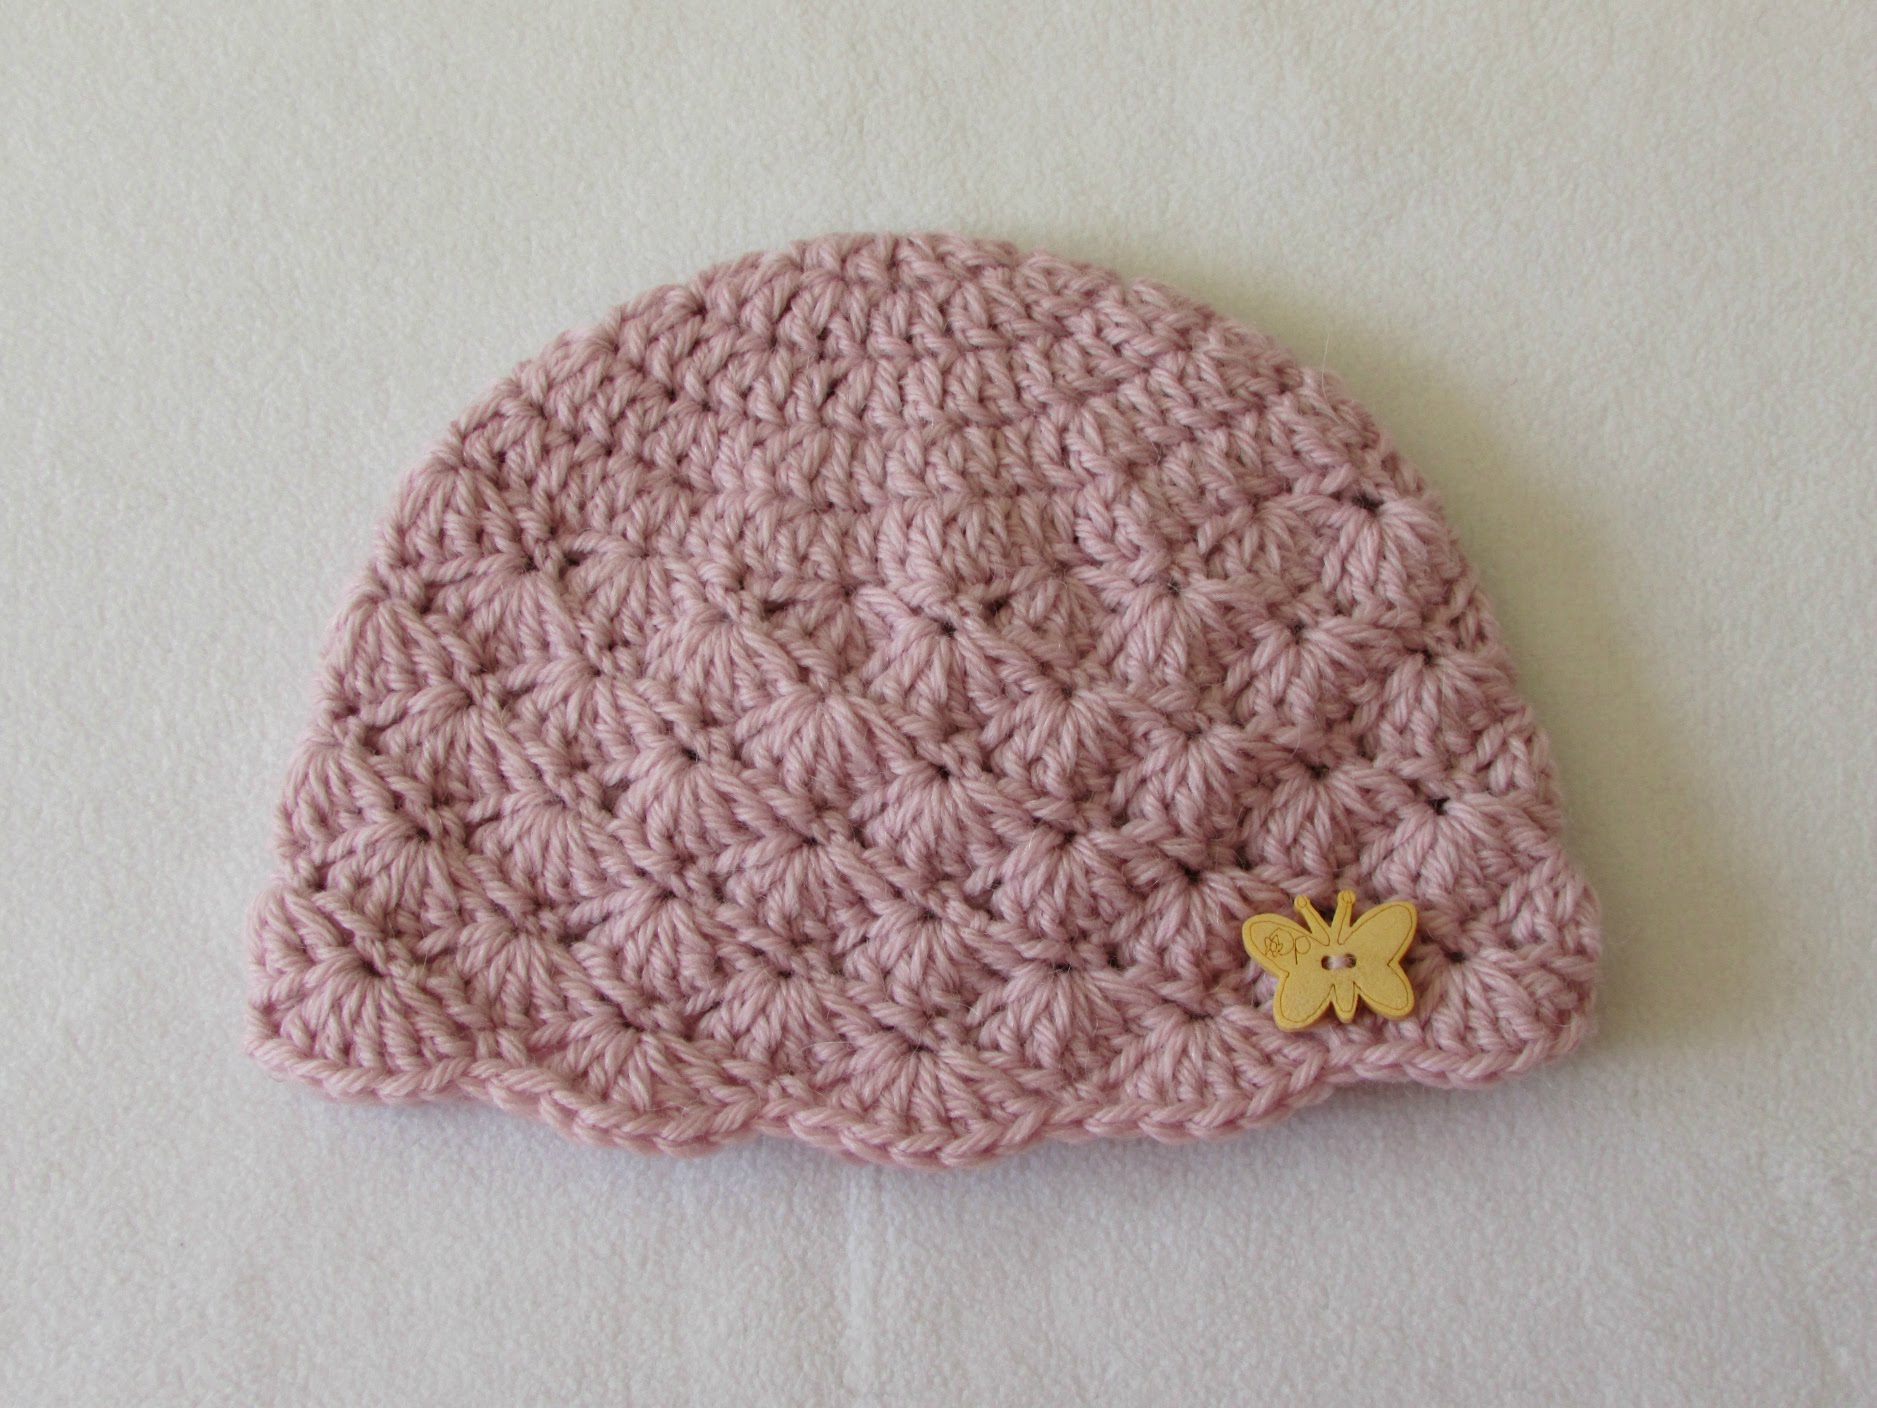 Crochet cap for babies how to crochet a cute baby girlu0027s hat for beginners - youtube FXQPFWH